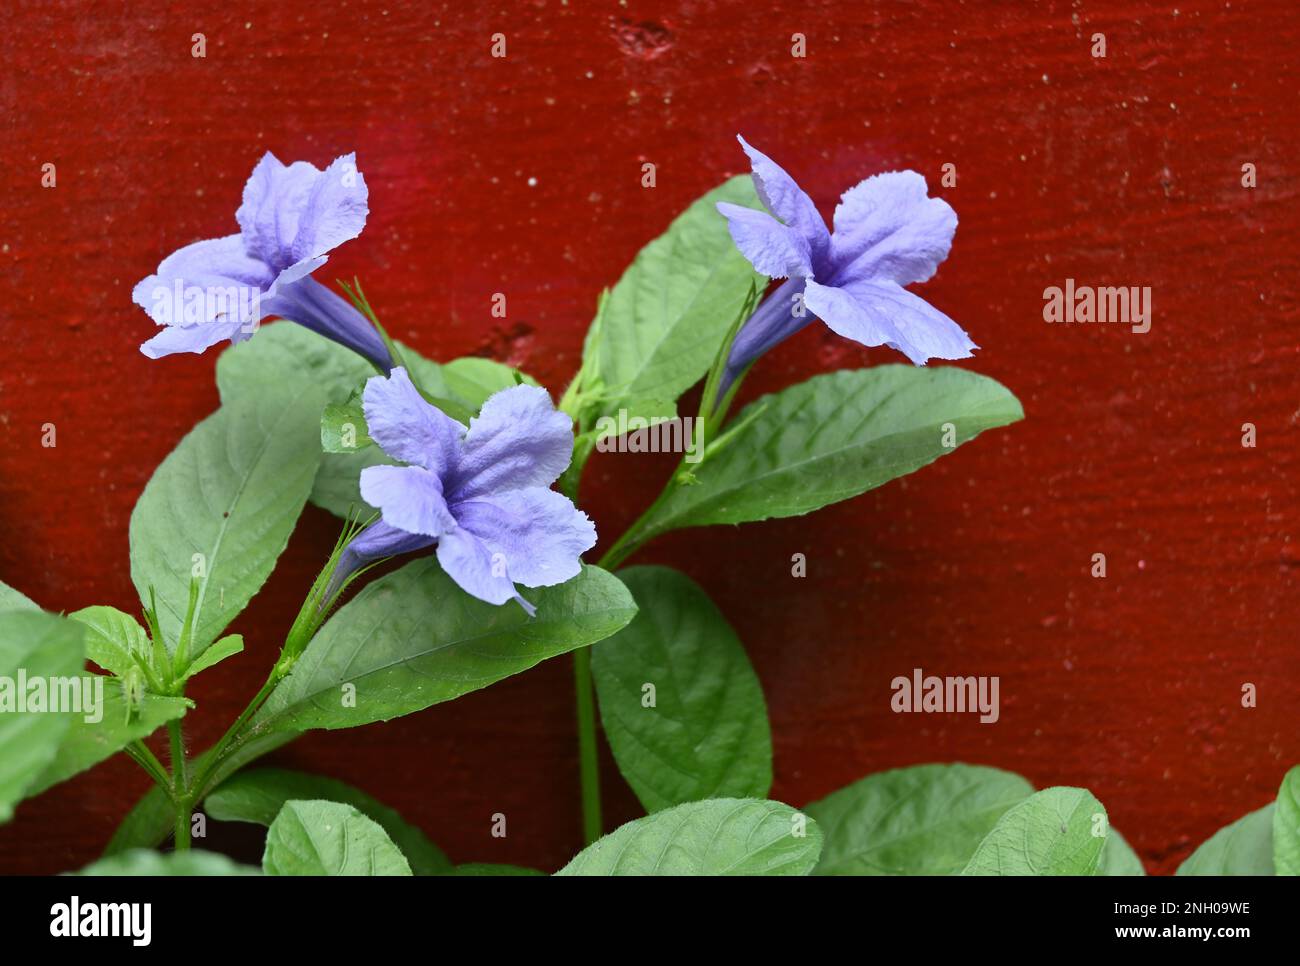 Purple trumpet shaped flowers of a Violet wild Petunia (Ruellia Nudiflora) plant against a reddish color wall Stock Photo